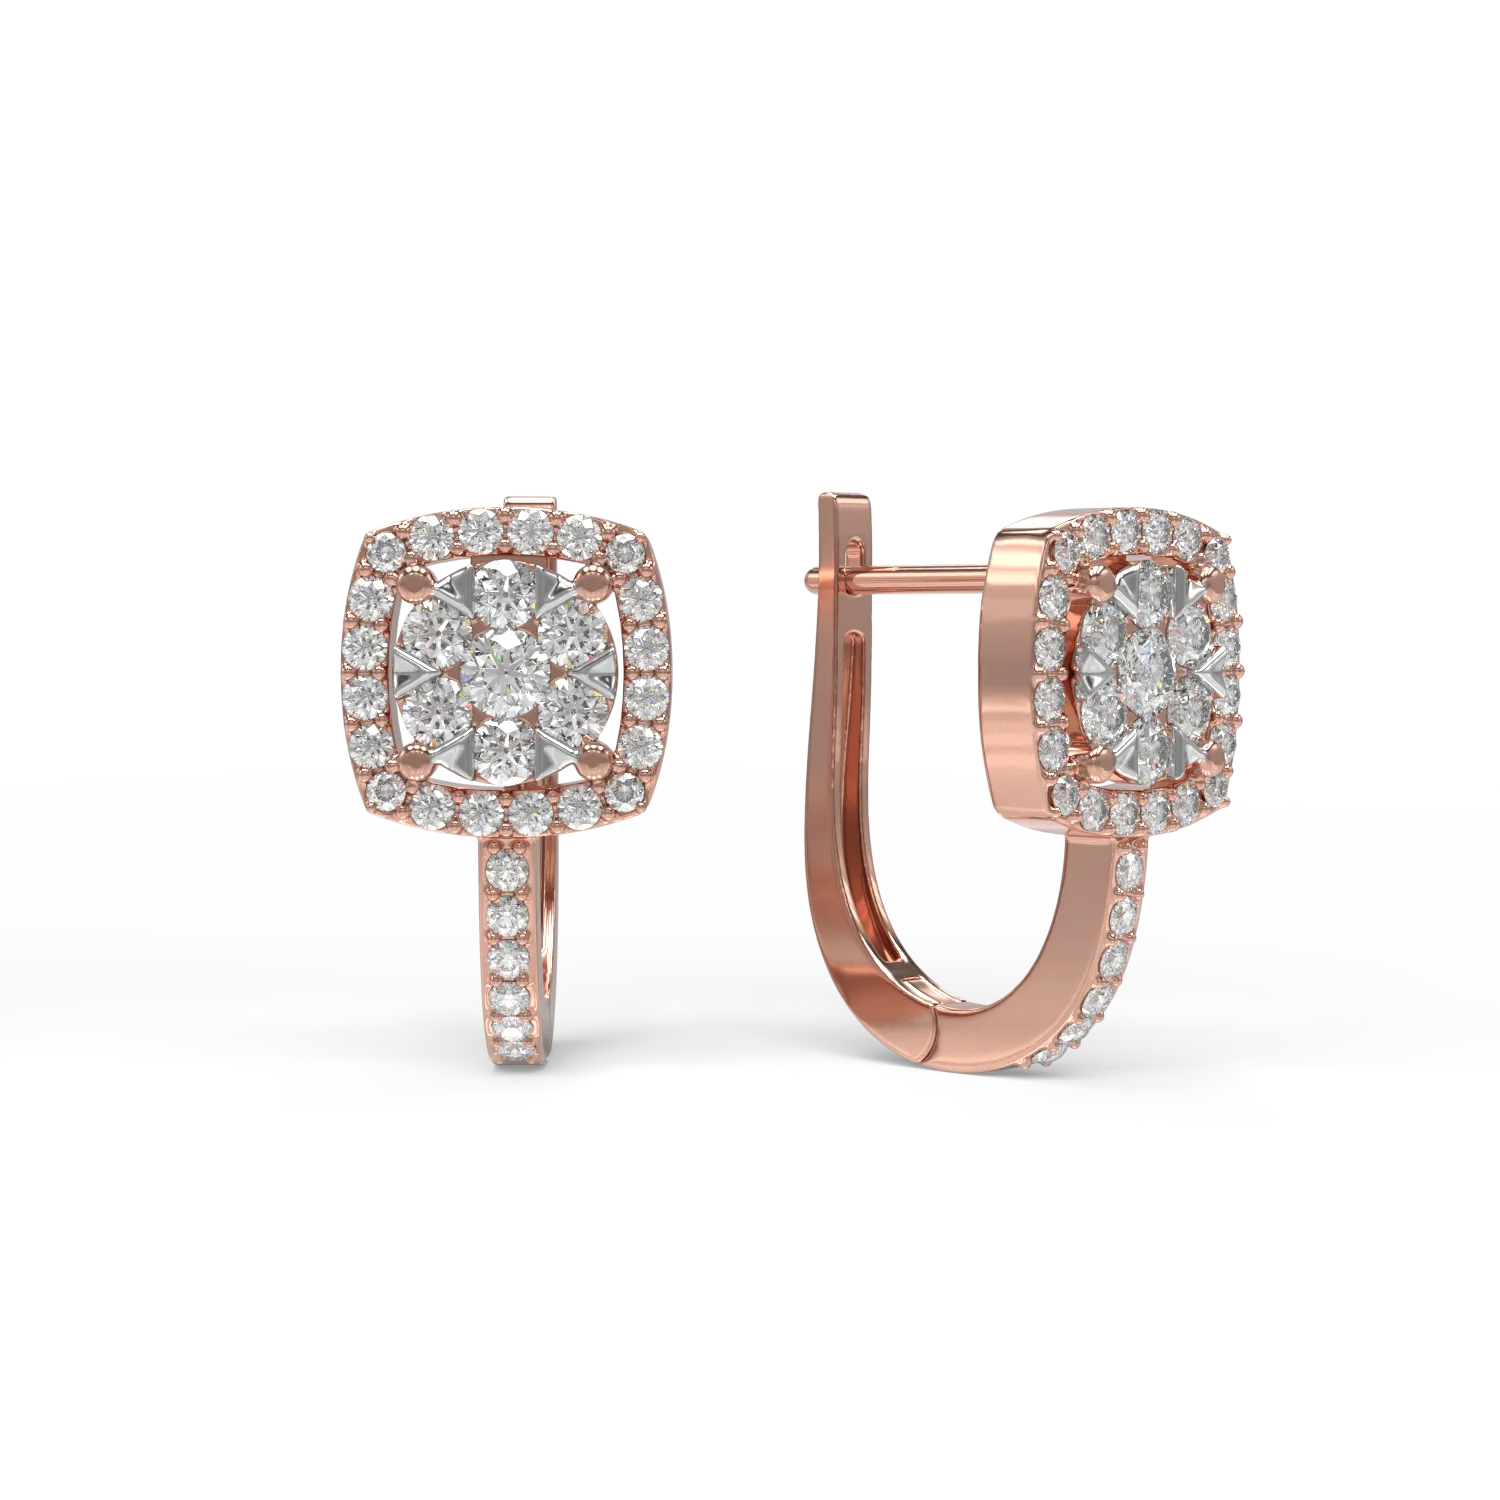 Rose gold earrings with 0.476ct diamonds